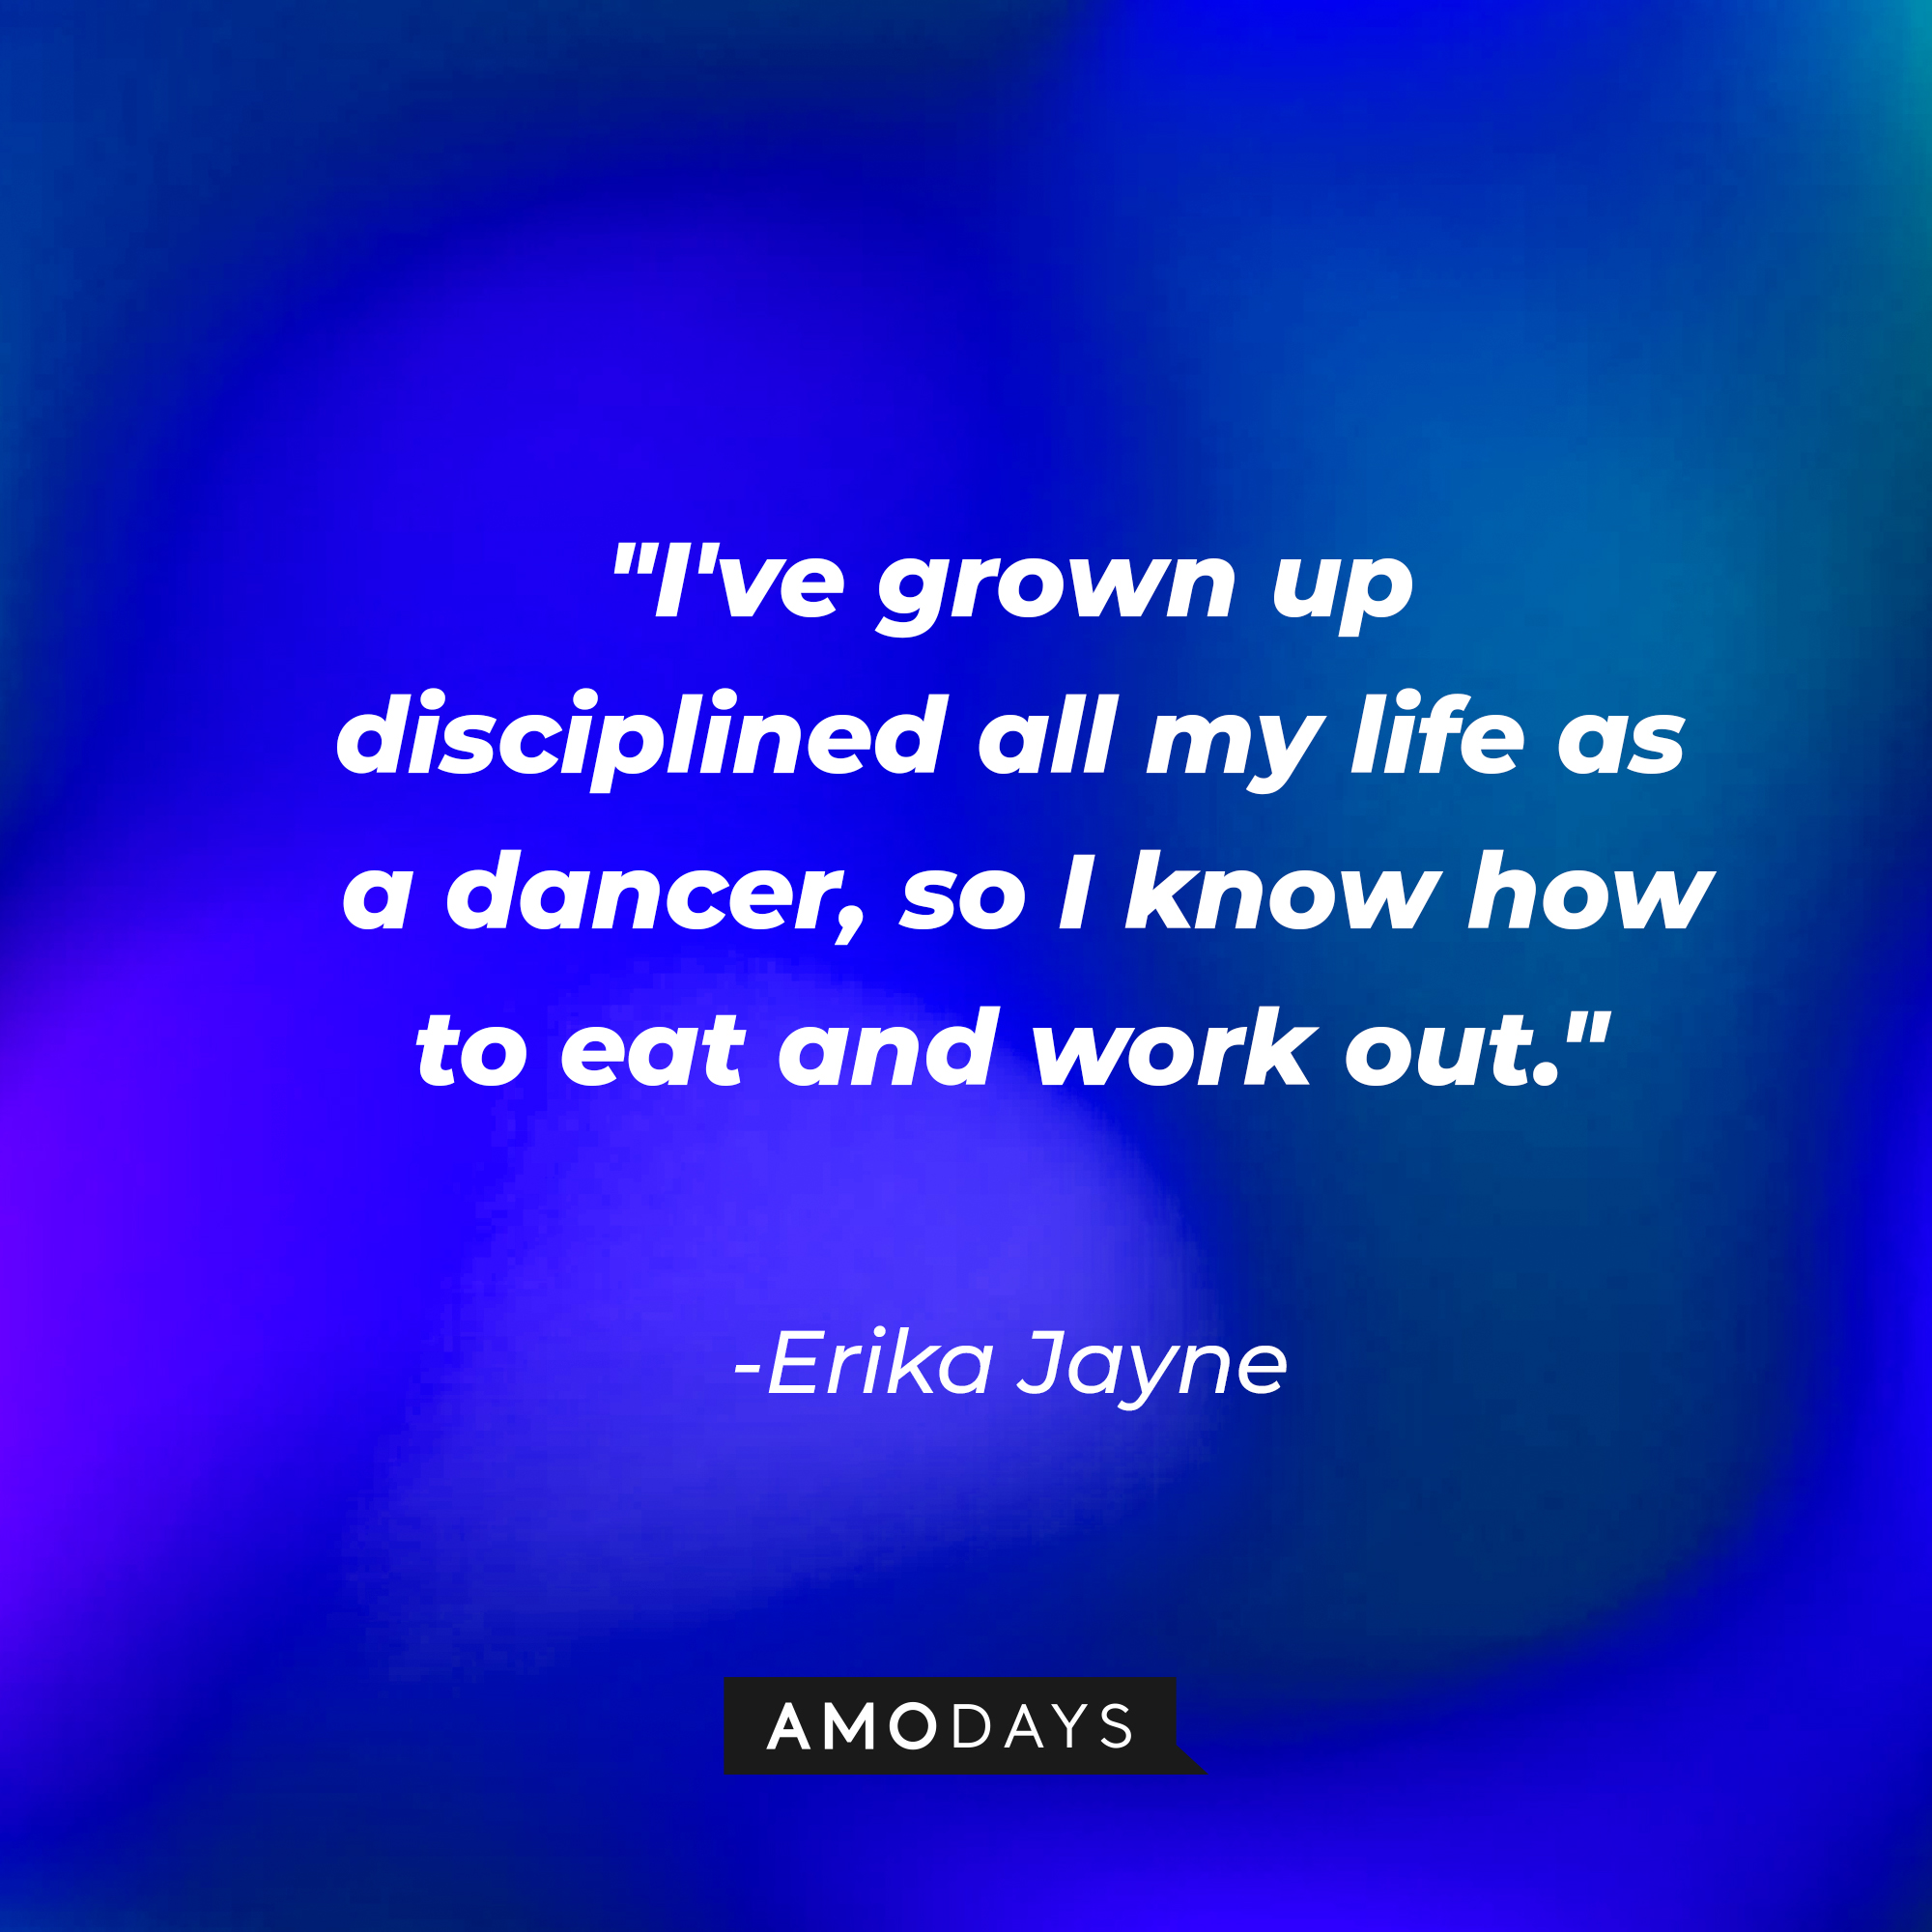 Erika Jayne’s quote: "I've grown up disciplined all my life as a dancer, so I know how to eat and work out." | Image: Amodays